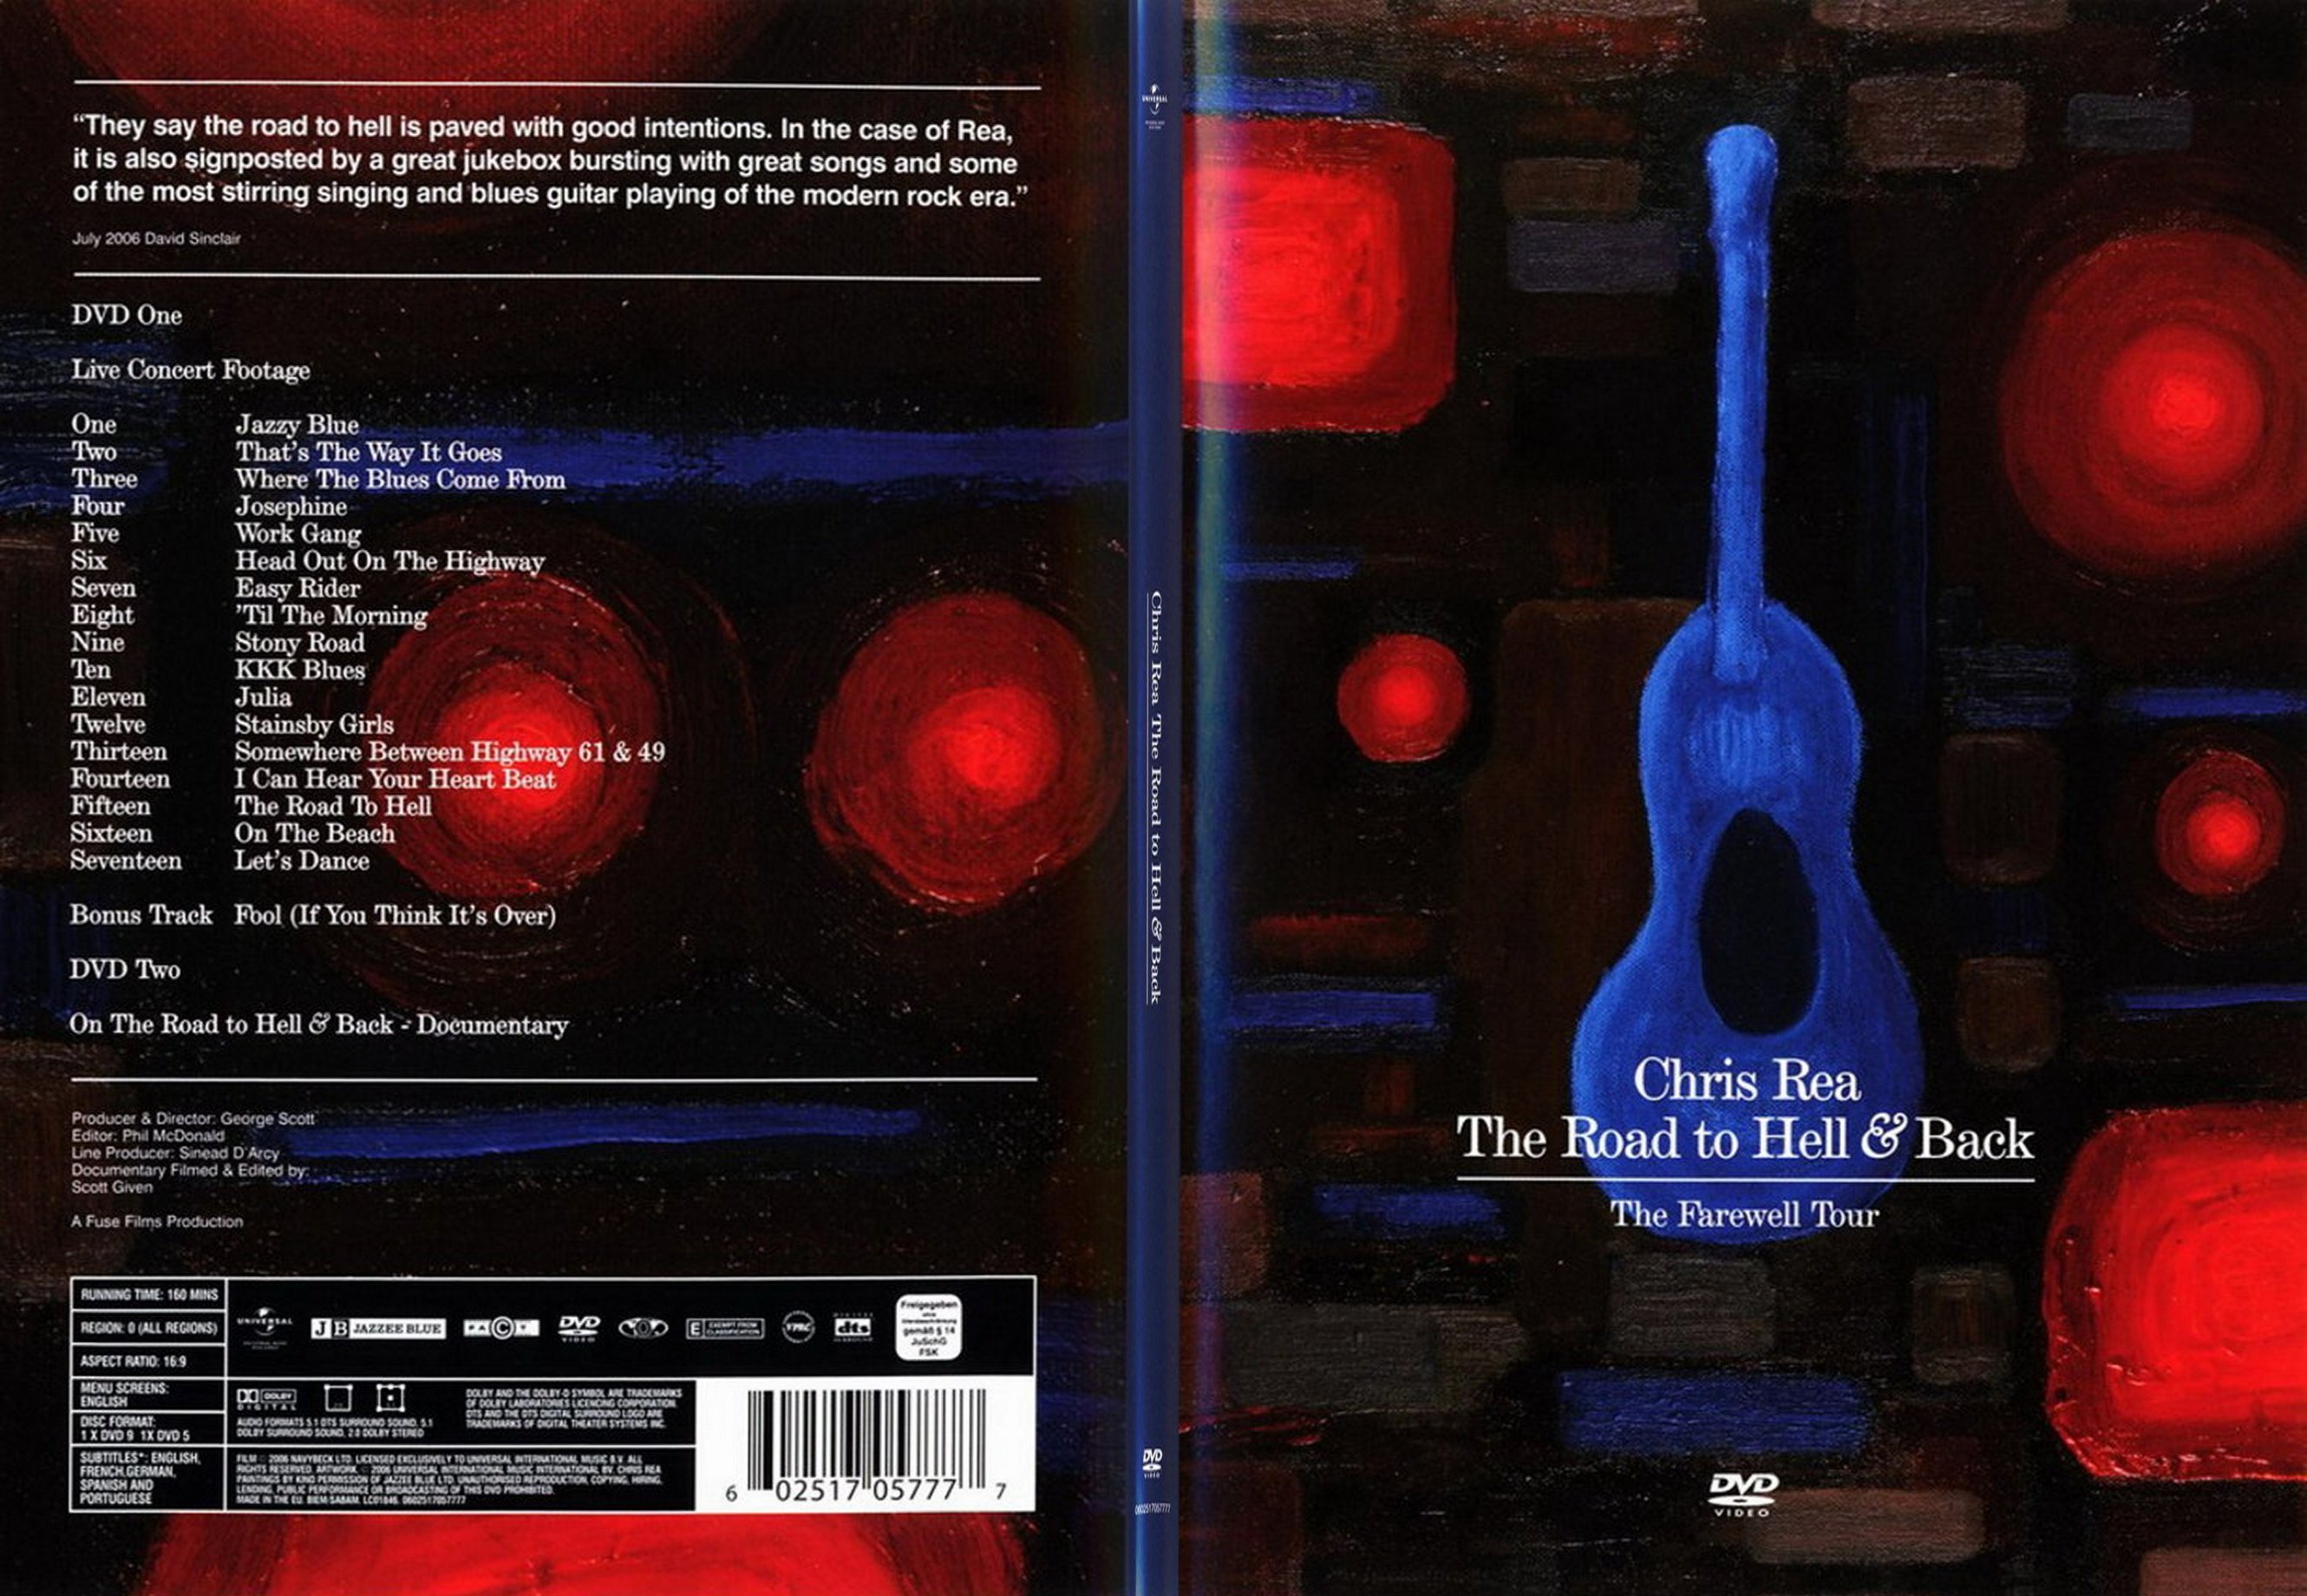 Jaquette DVD Chris Rea The Road to Hell & Back - SLIM